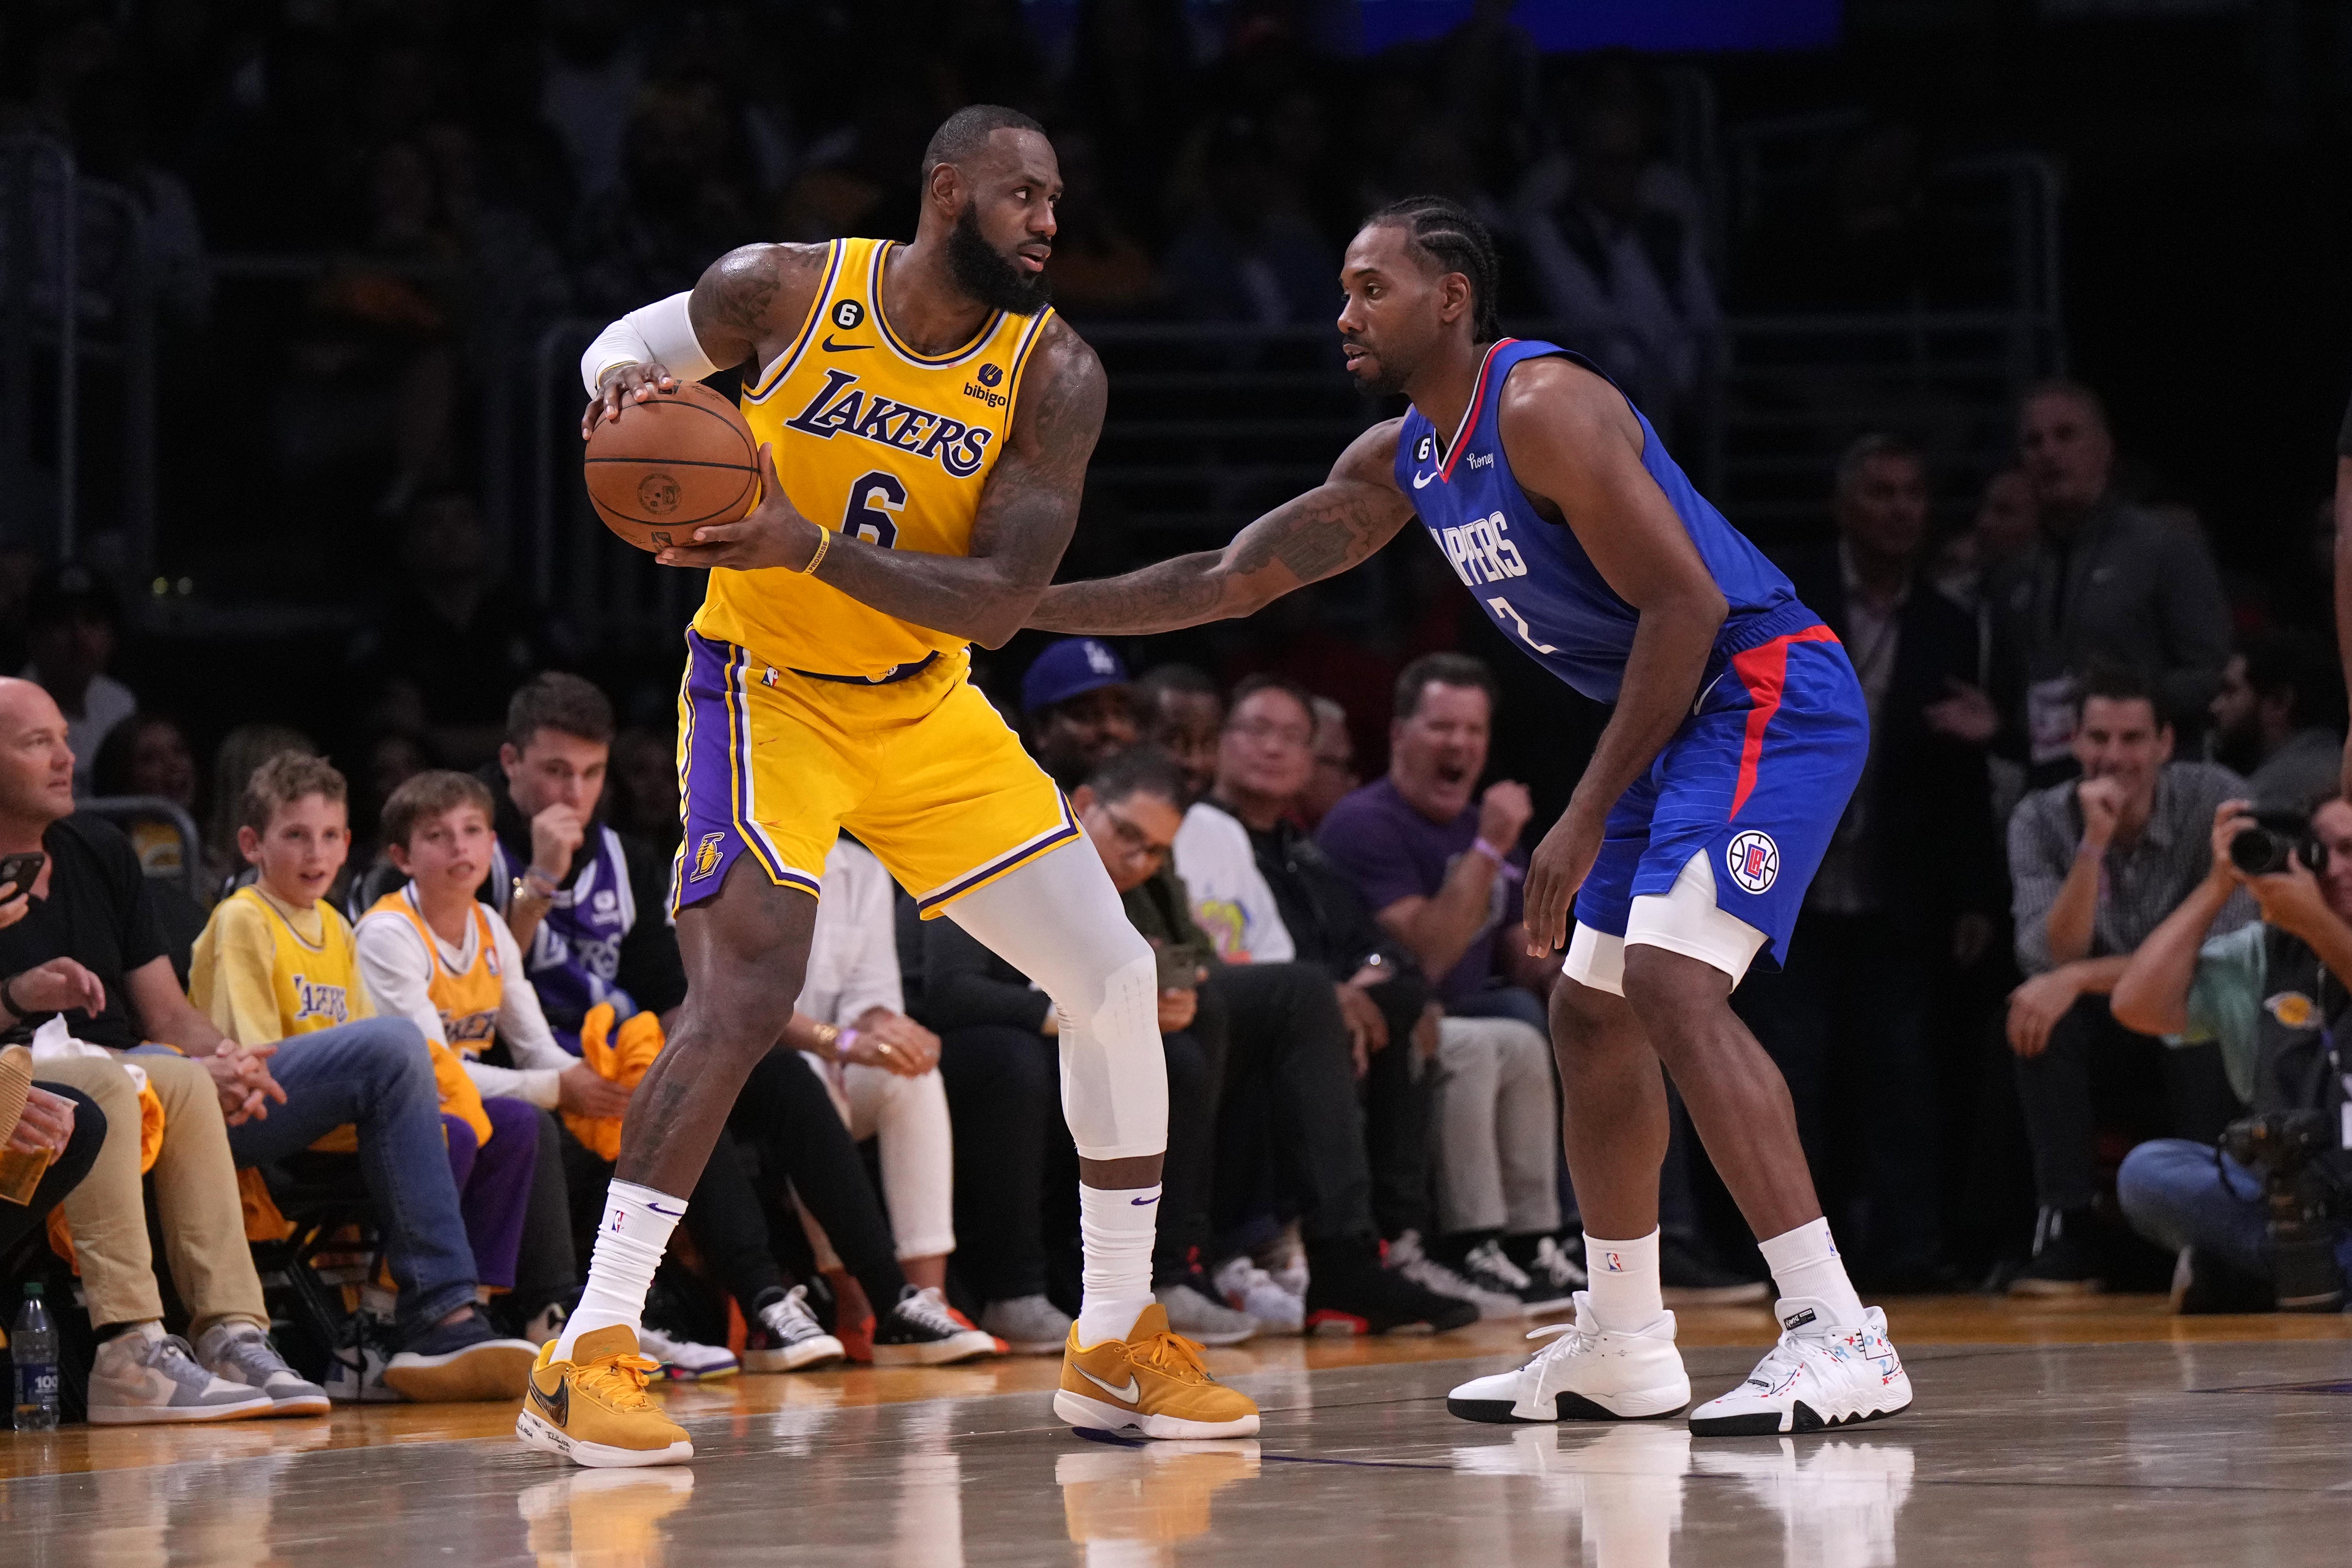 Los Angeles Lakers forward LeBron James (6) is defended by LA Clippers forward Kawhi Leonard (2) in the second half at Crypto.com Arena. The Clippers defeated the Lakers 103-97.&nbsp;